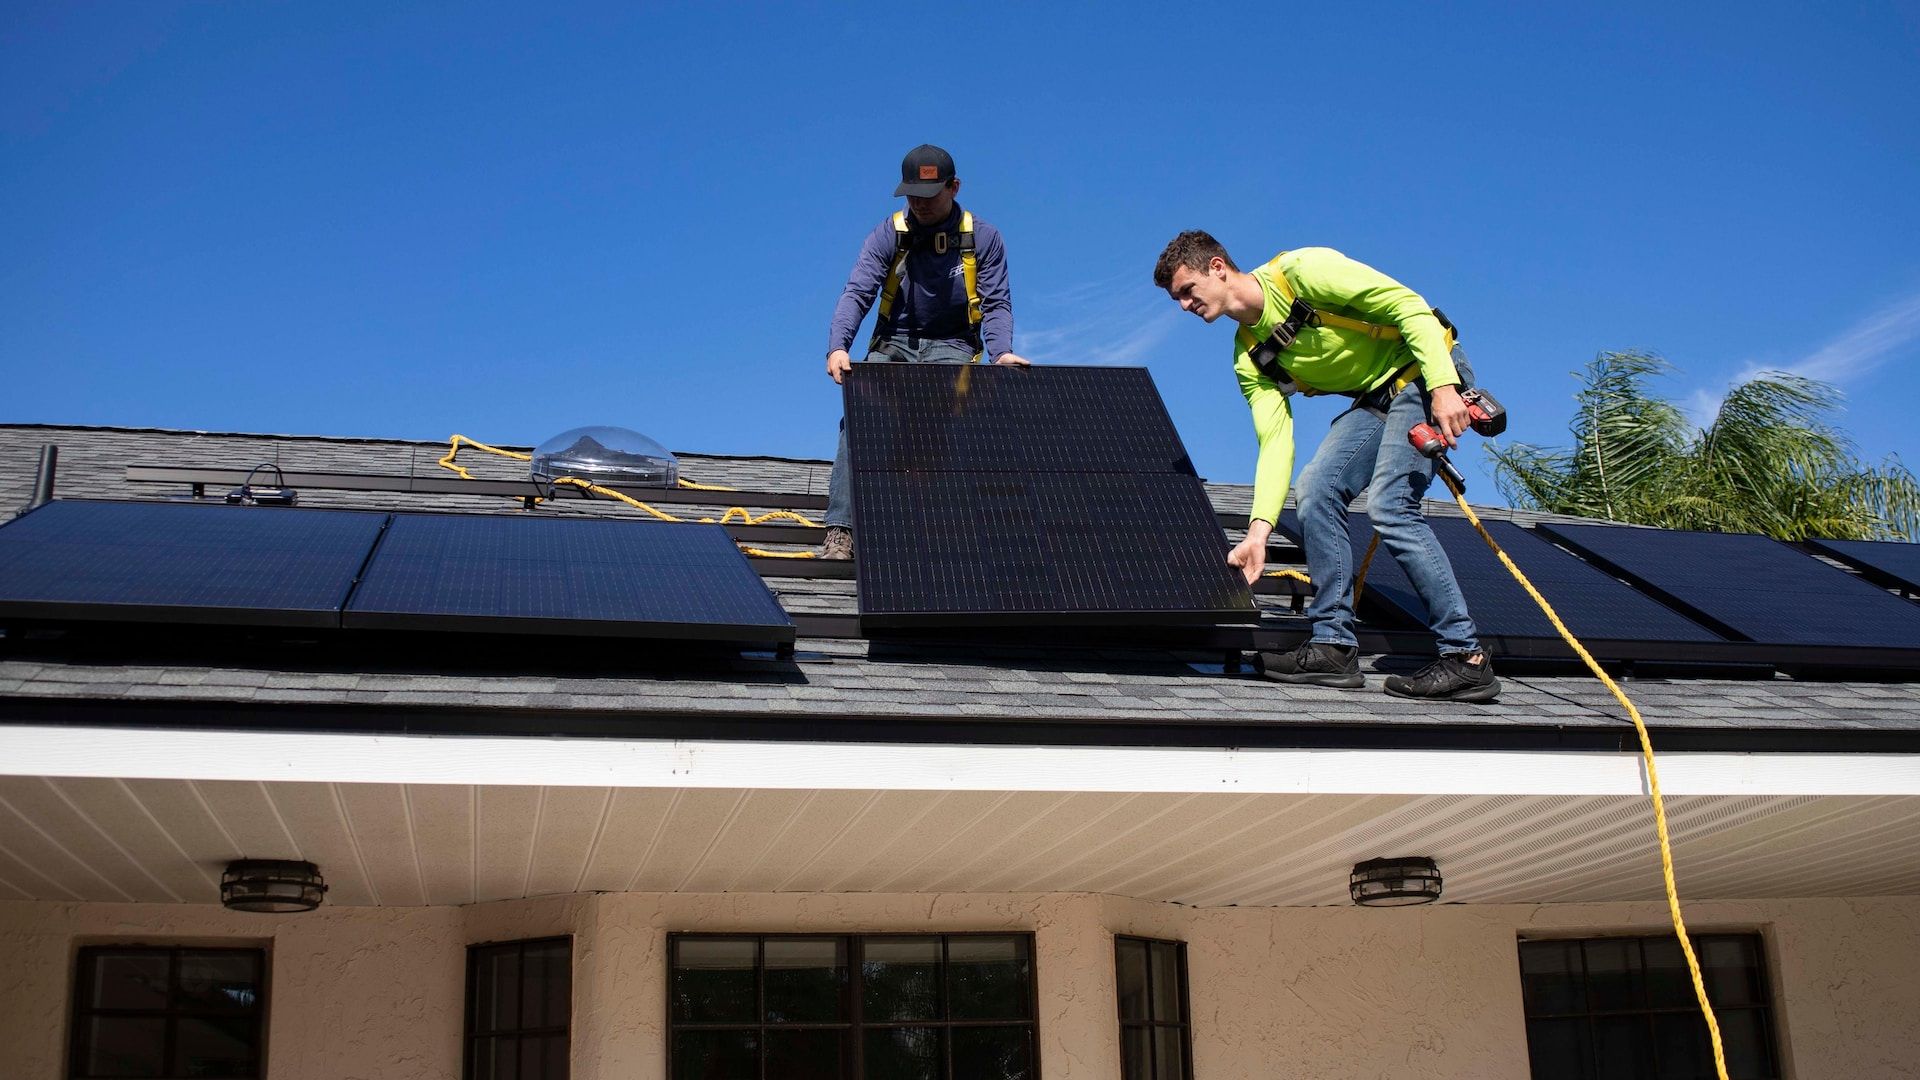 Two persons installing solar panels on a roof